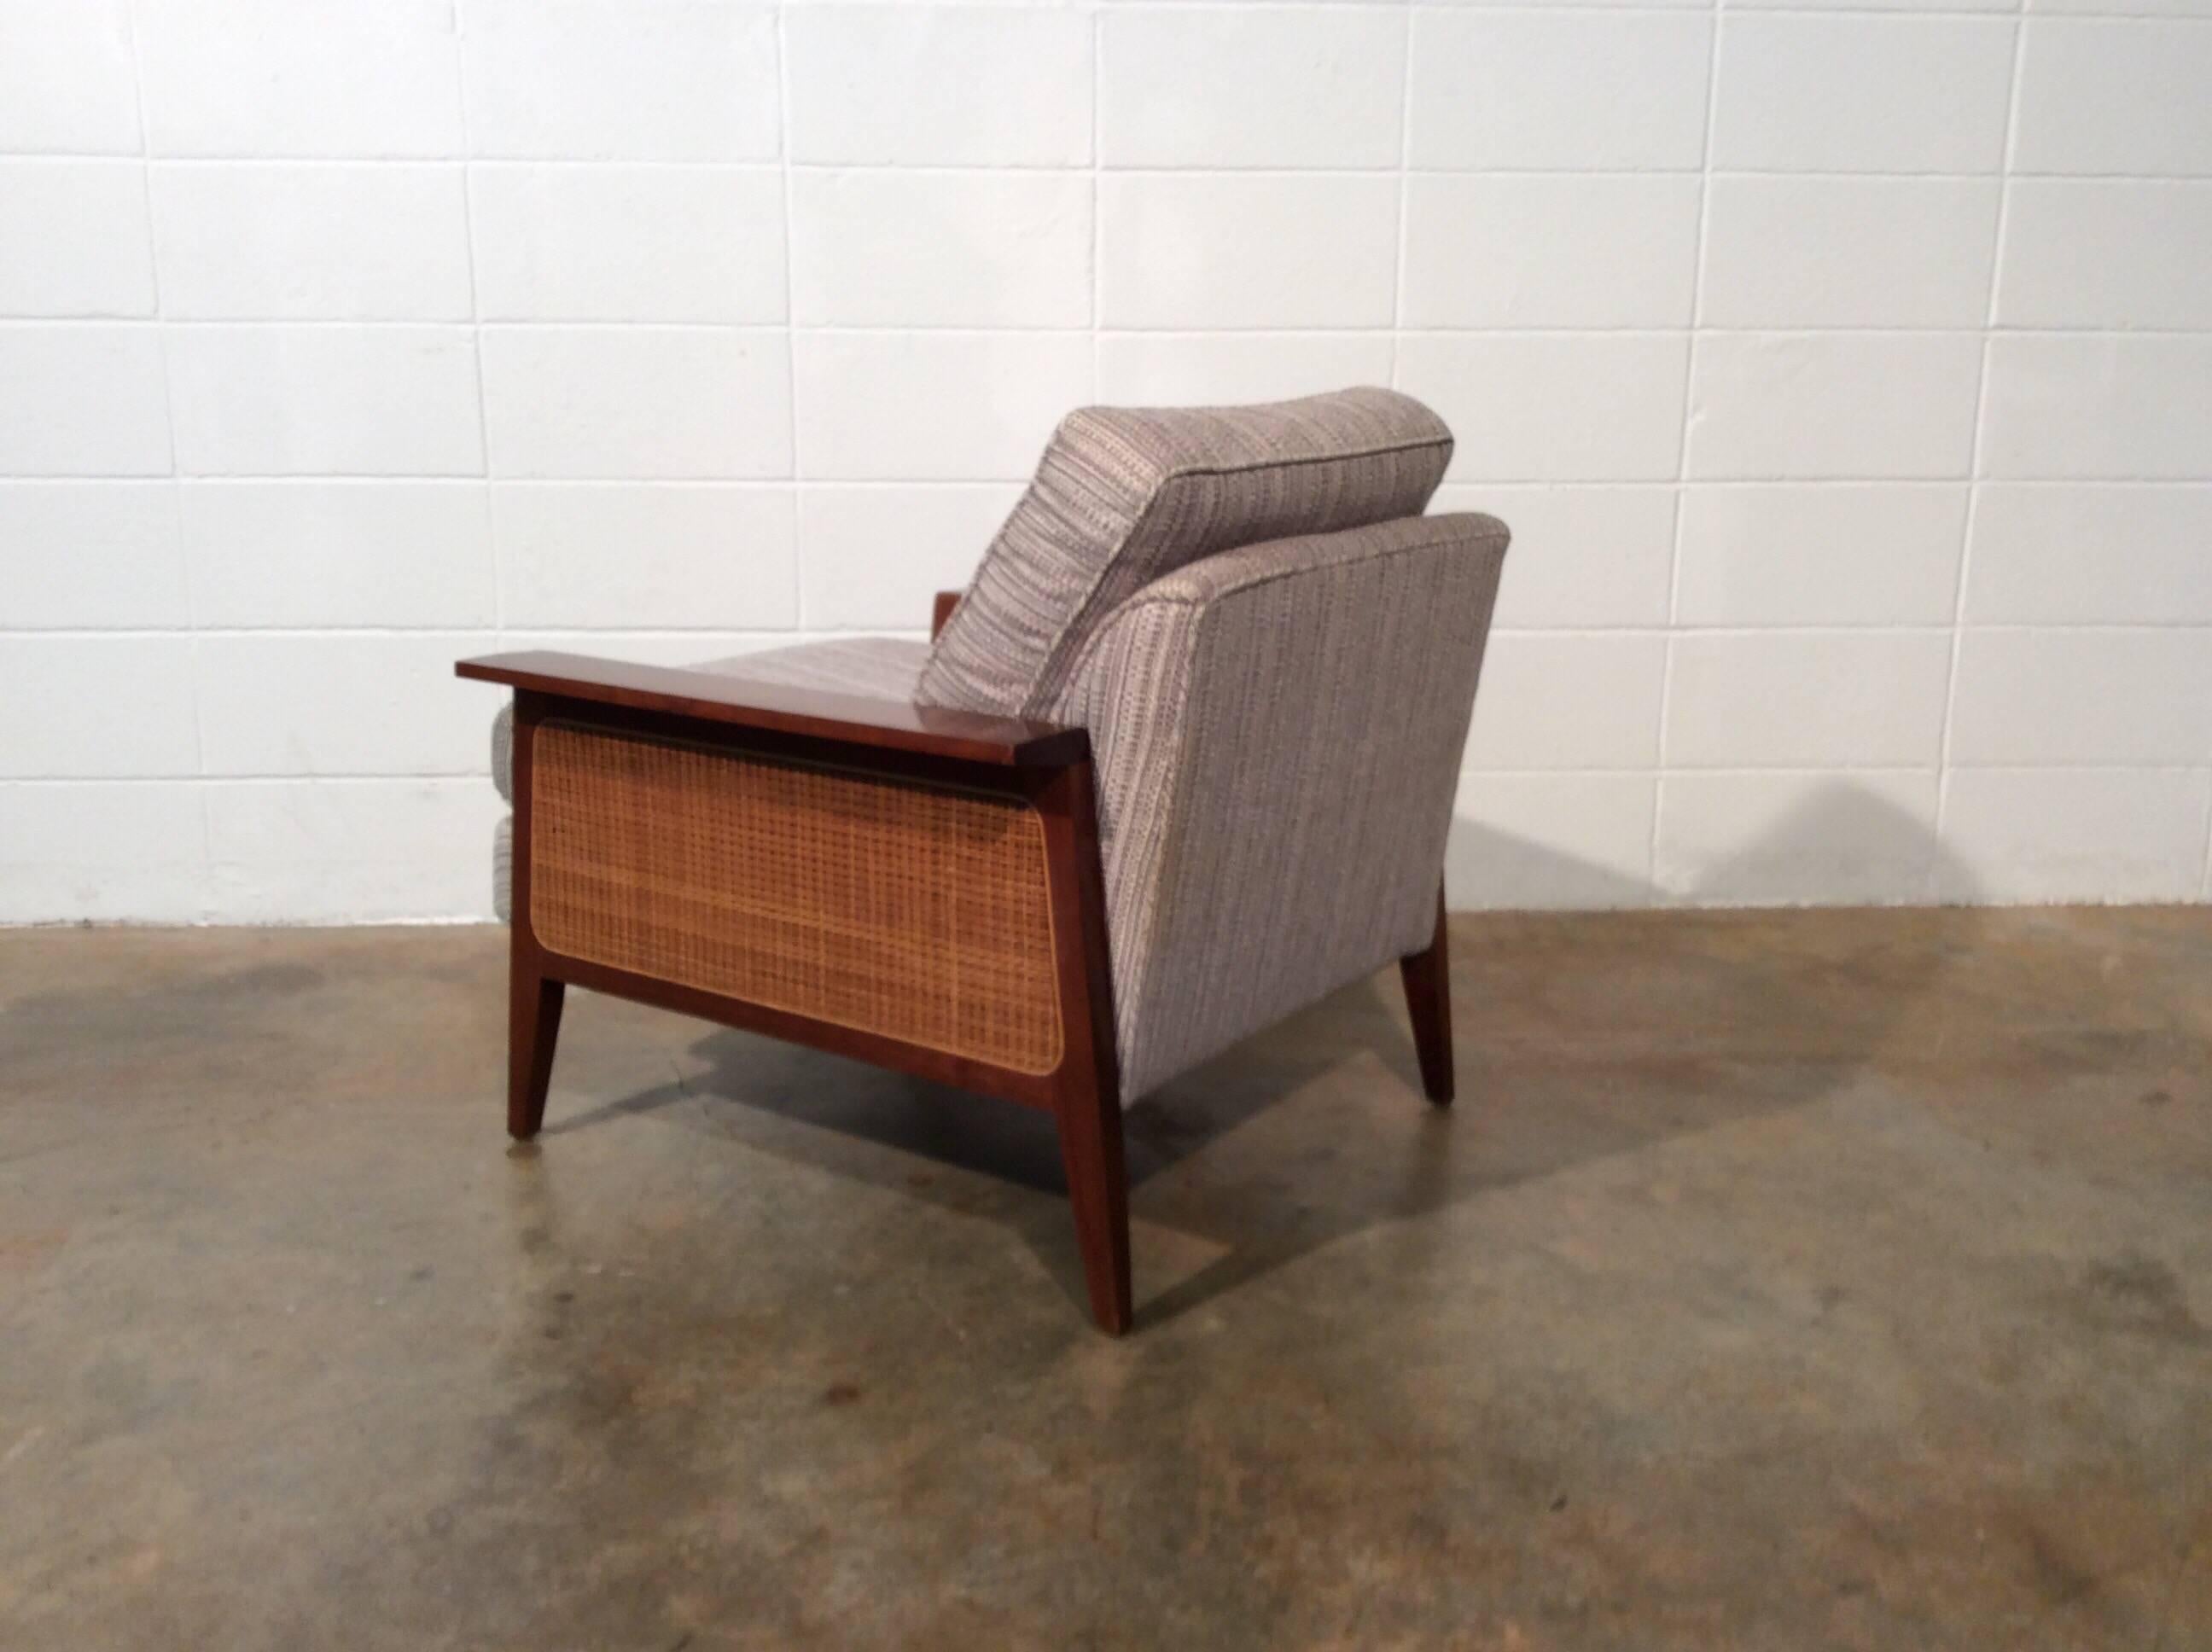 Unique and Restored Mid-Century Modern Chair by Iconic Galloways of Tampa 2